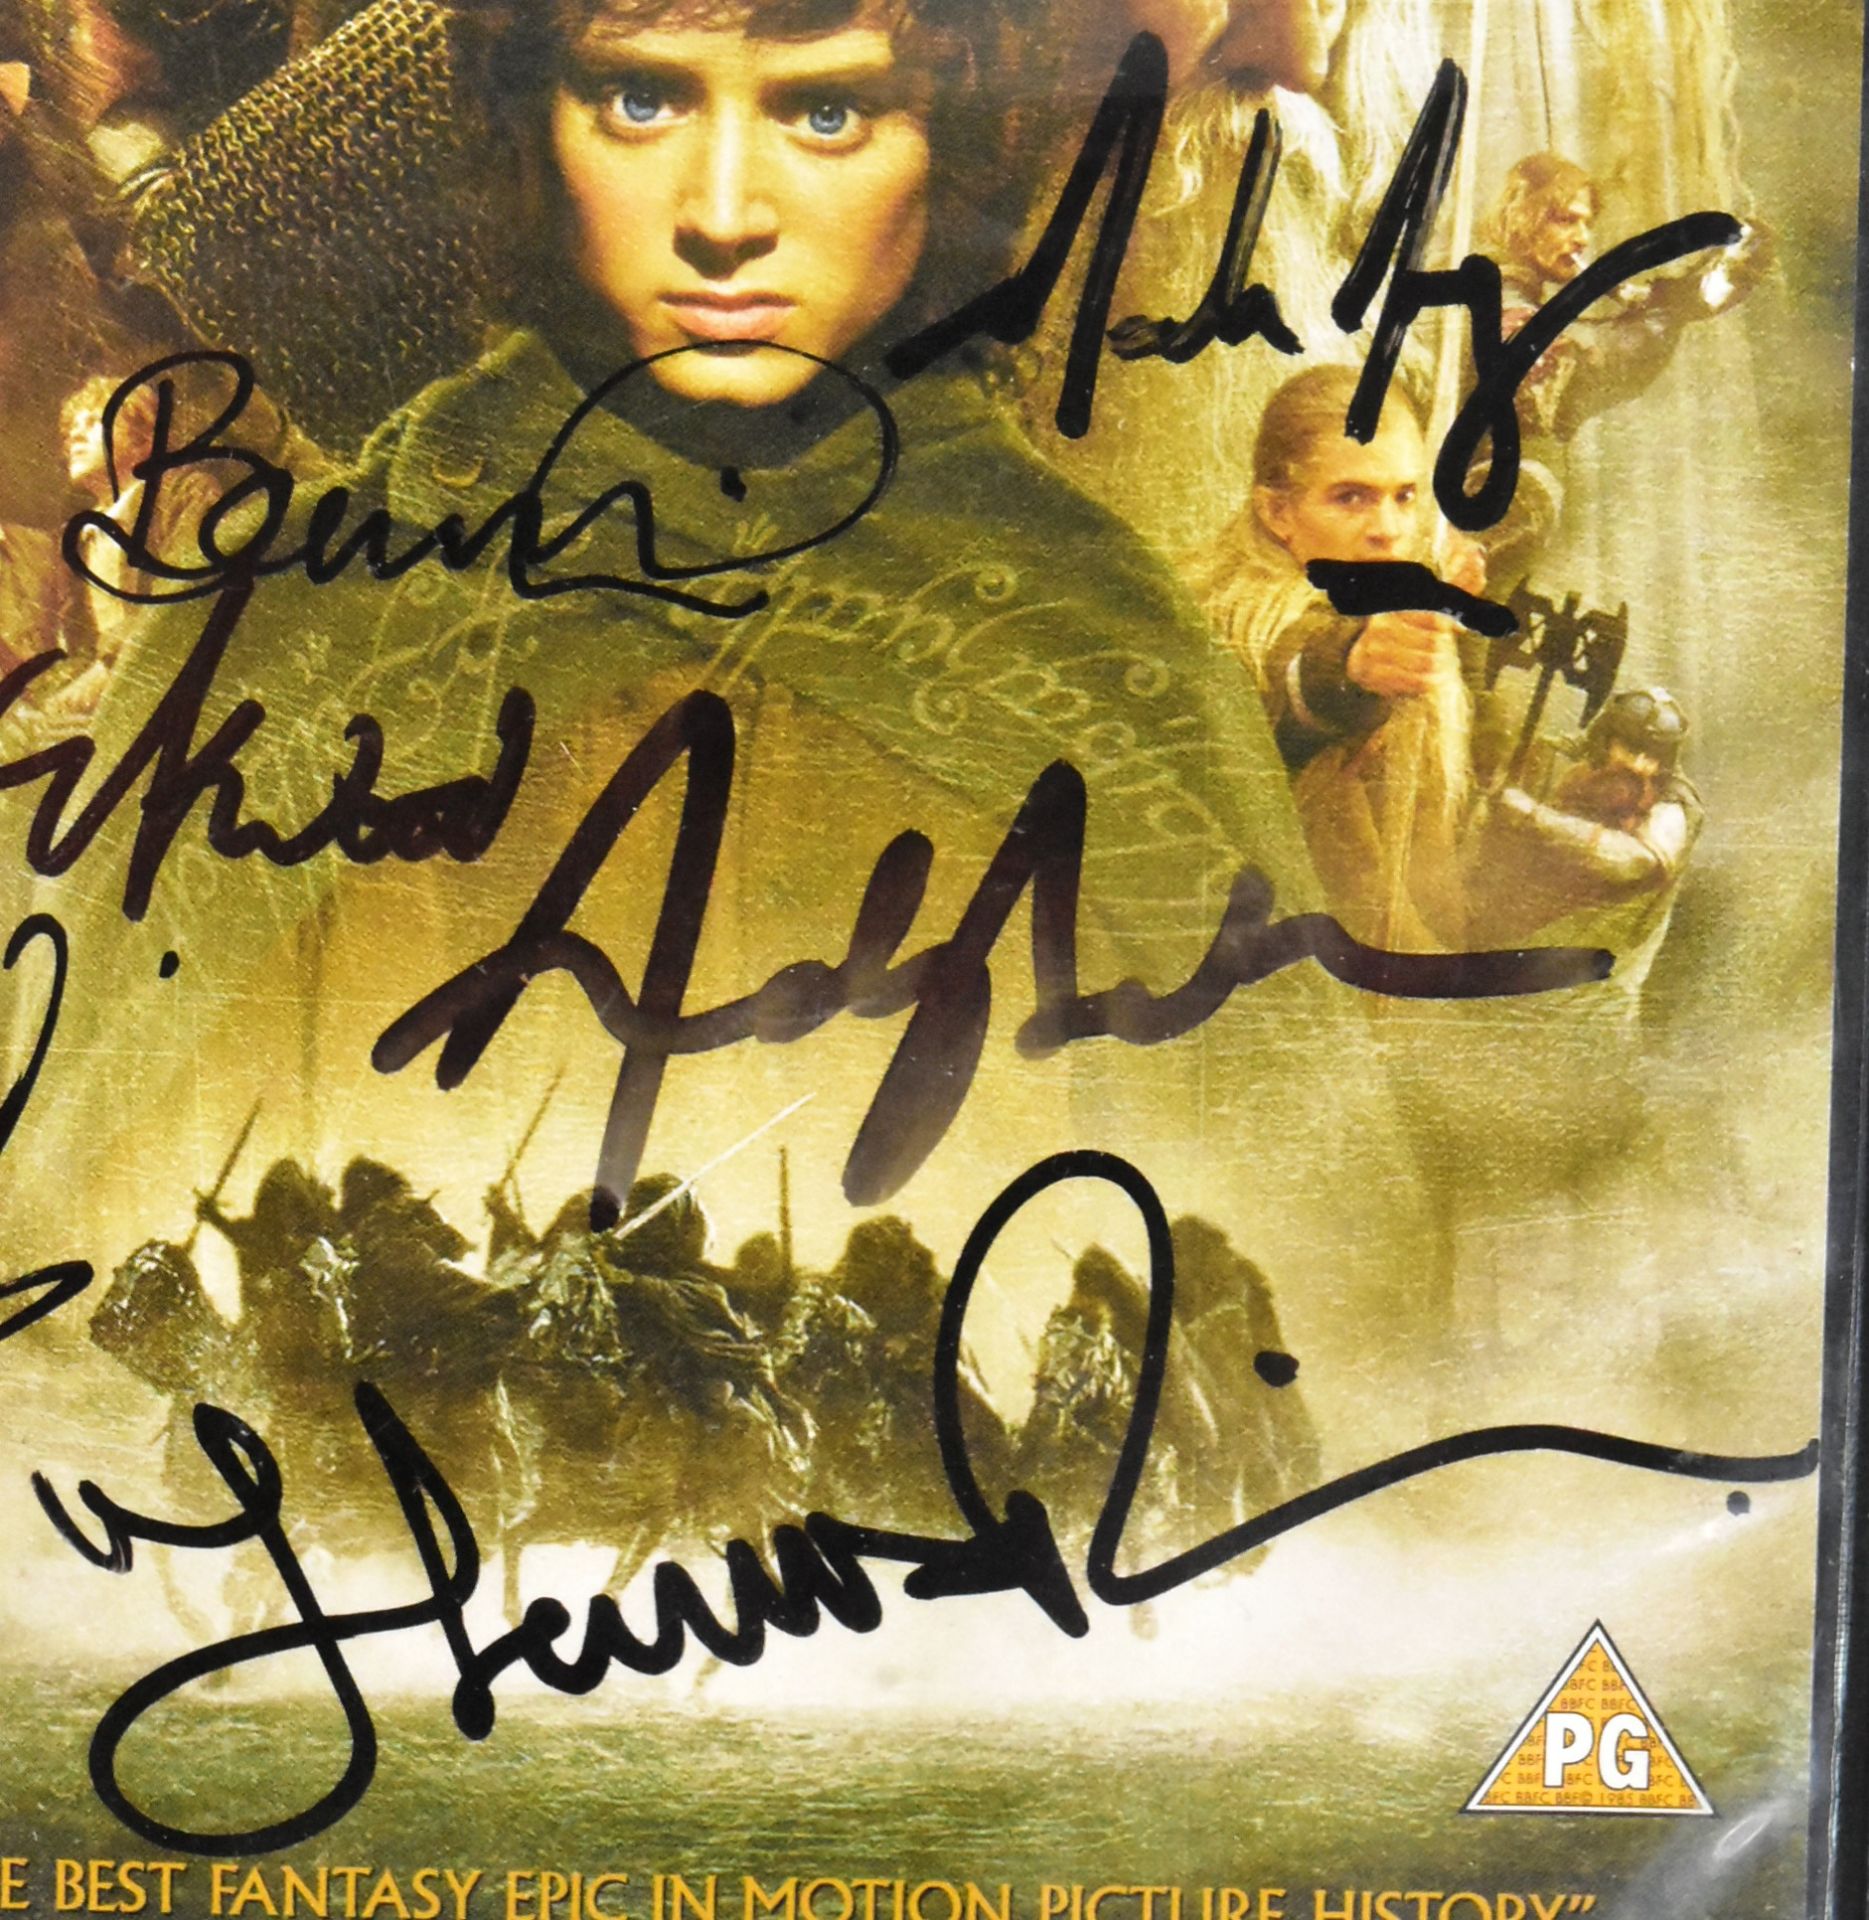 LORD OF THE RINGS - THE FELLOWSHIP OF THE RING - SIGNED DVD - Image 4 of 8